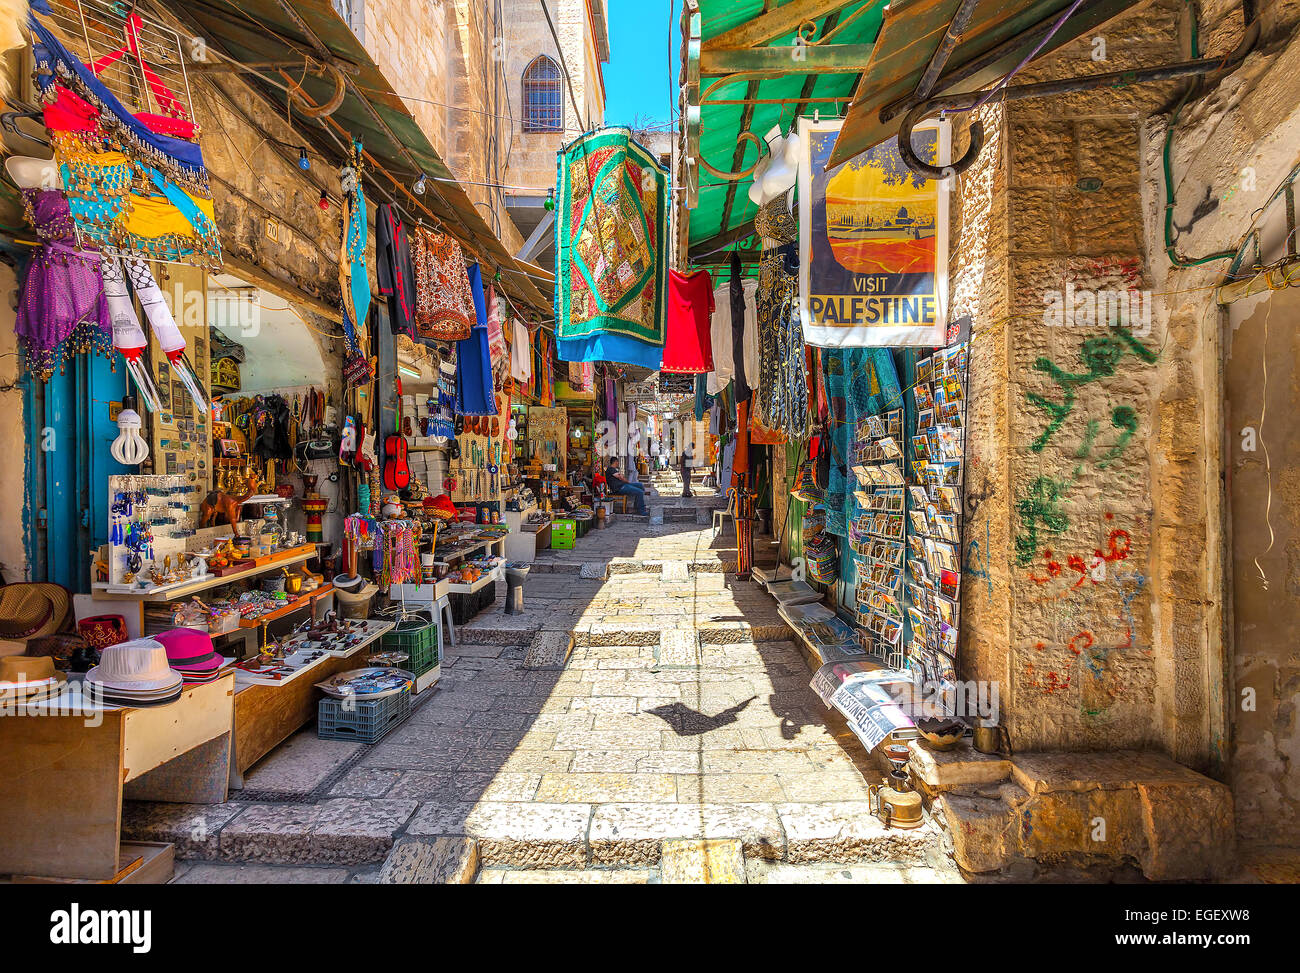 Narrow stone street among stalls with traditional souvenirs and goods at bazaar in Jerusalem. Stock Photo